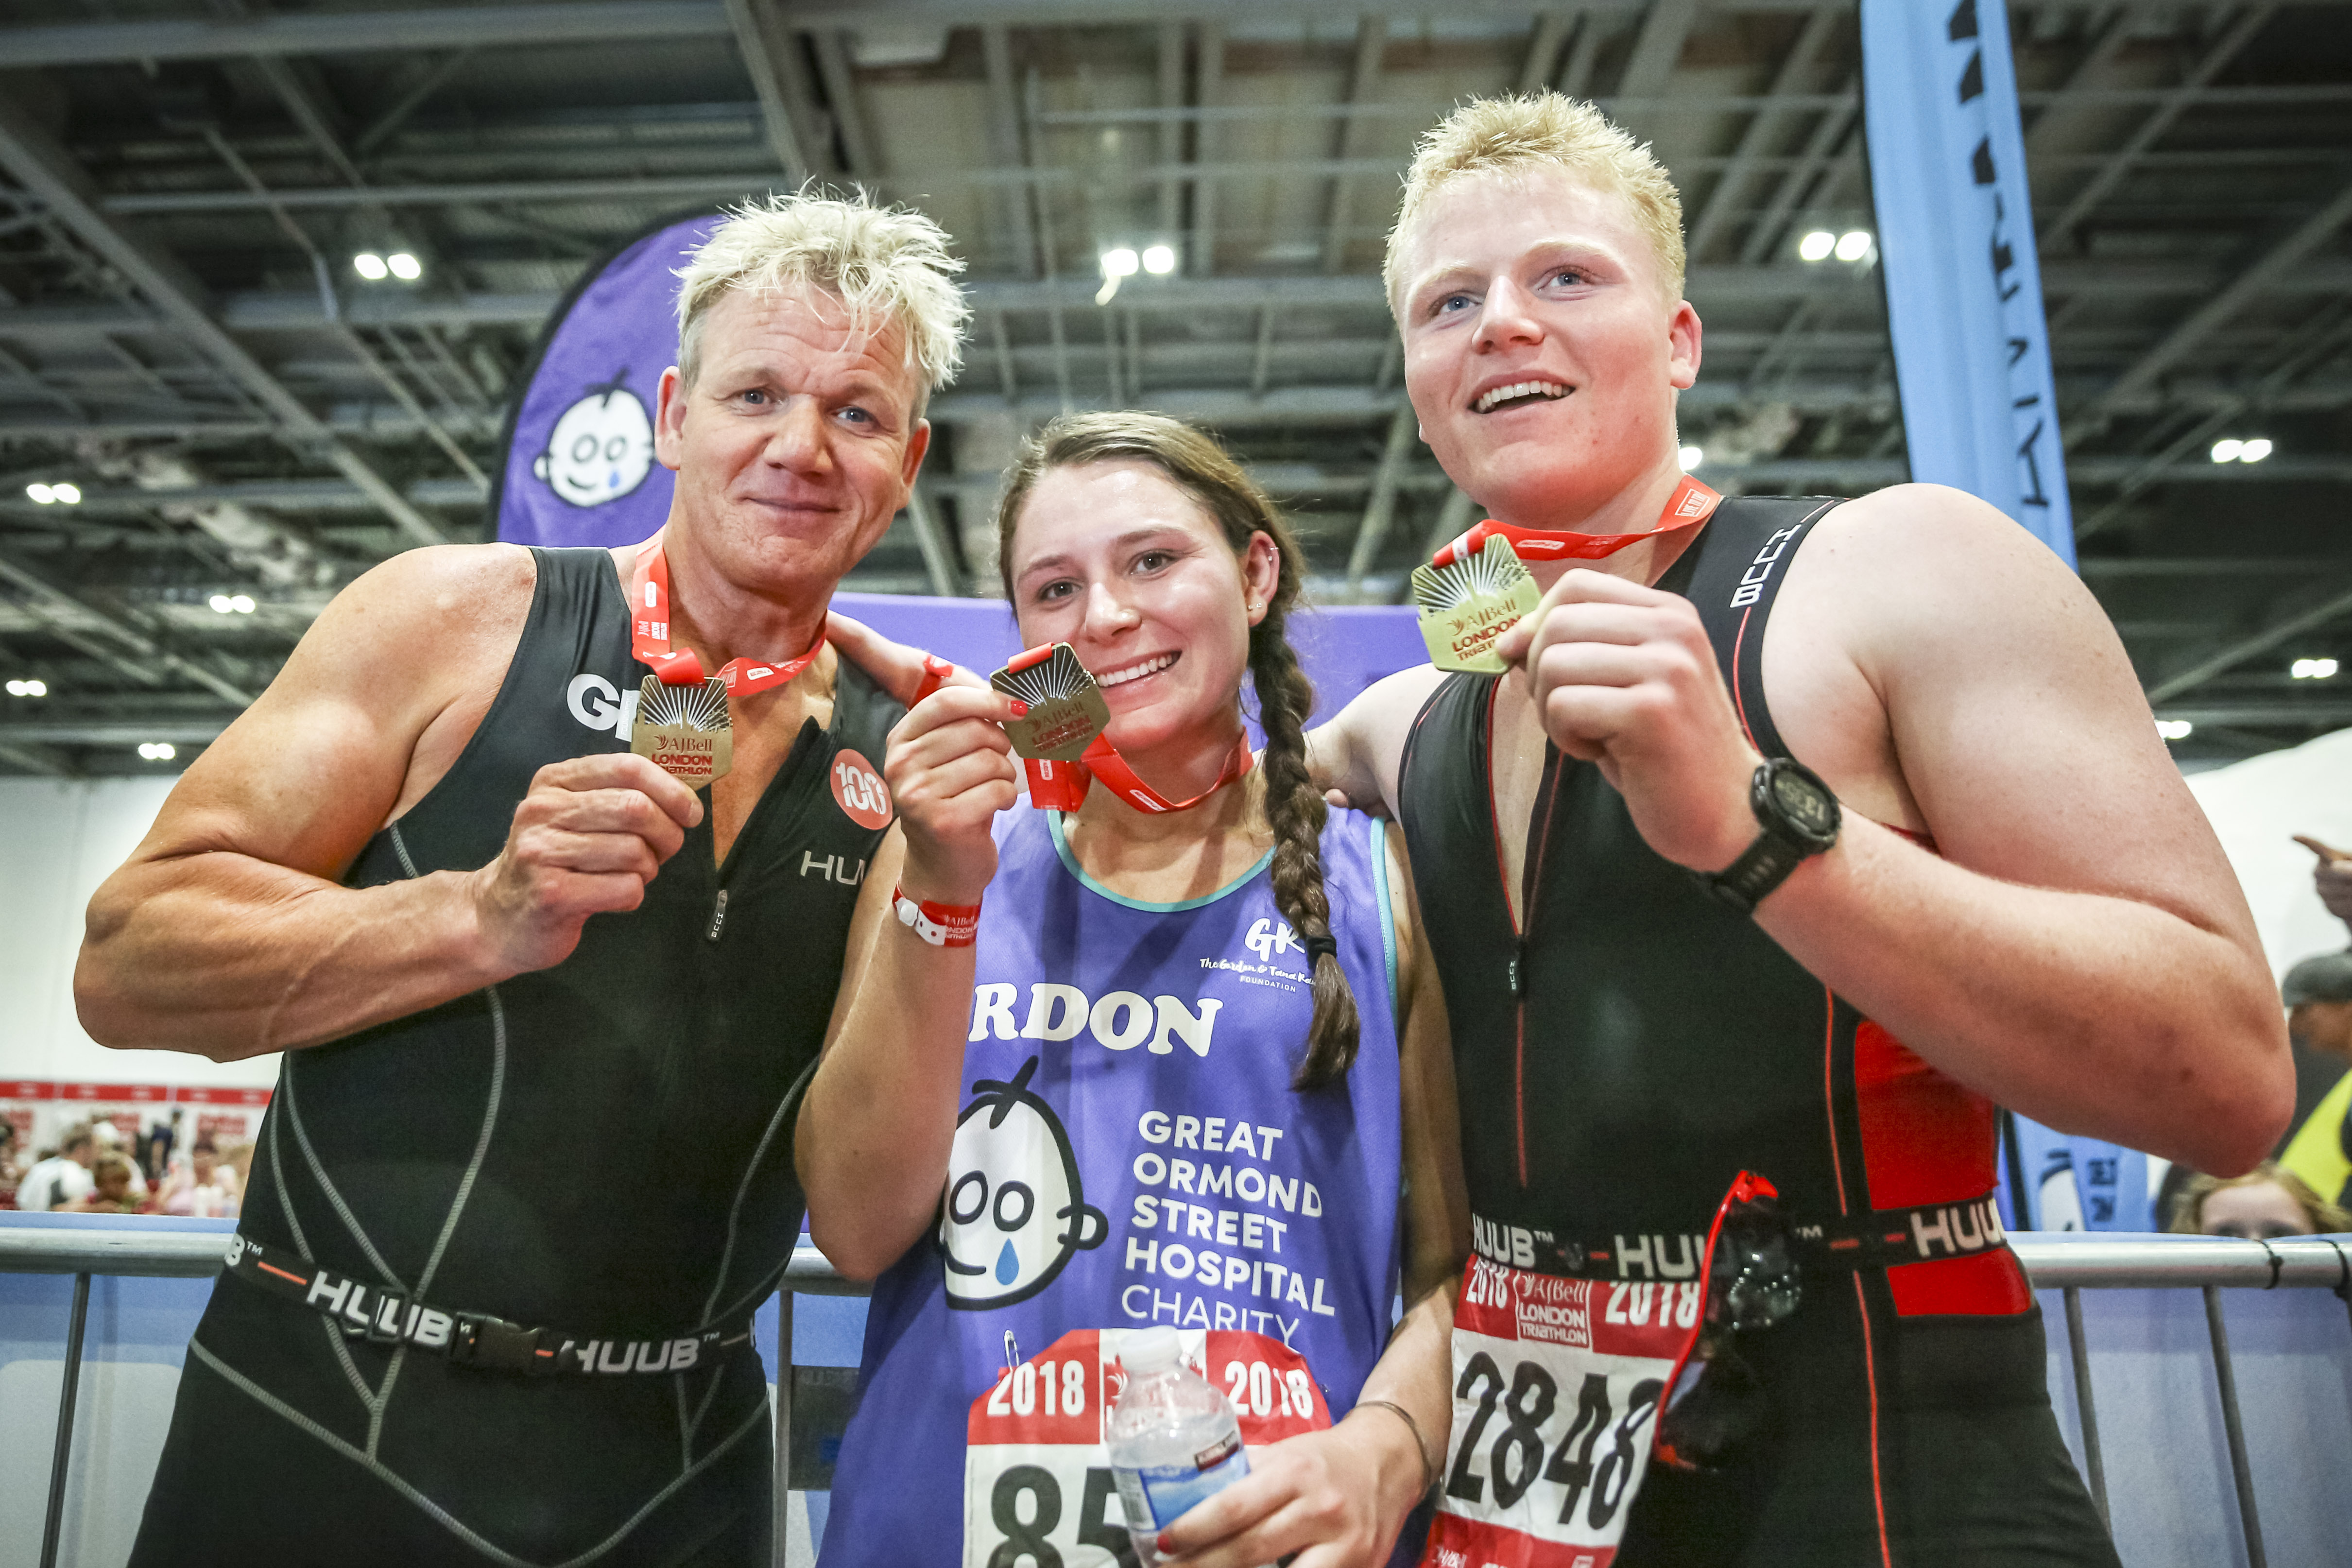 Gordon Ramsay, Megan Jane Ramsay, and Jack Scott Ramsay after successfully completing the AJ Bell Triathlon on August 4, 2018, in London, England. | Source: Getty Images